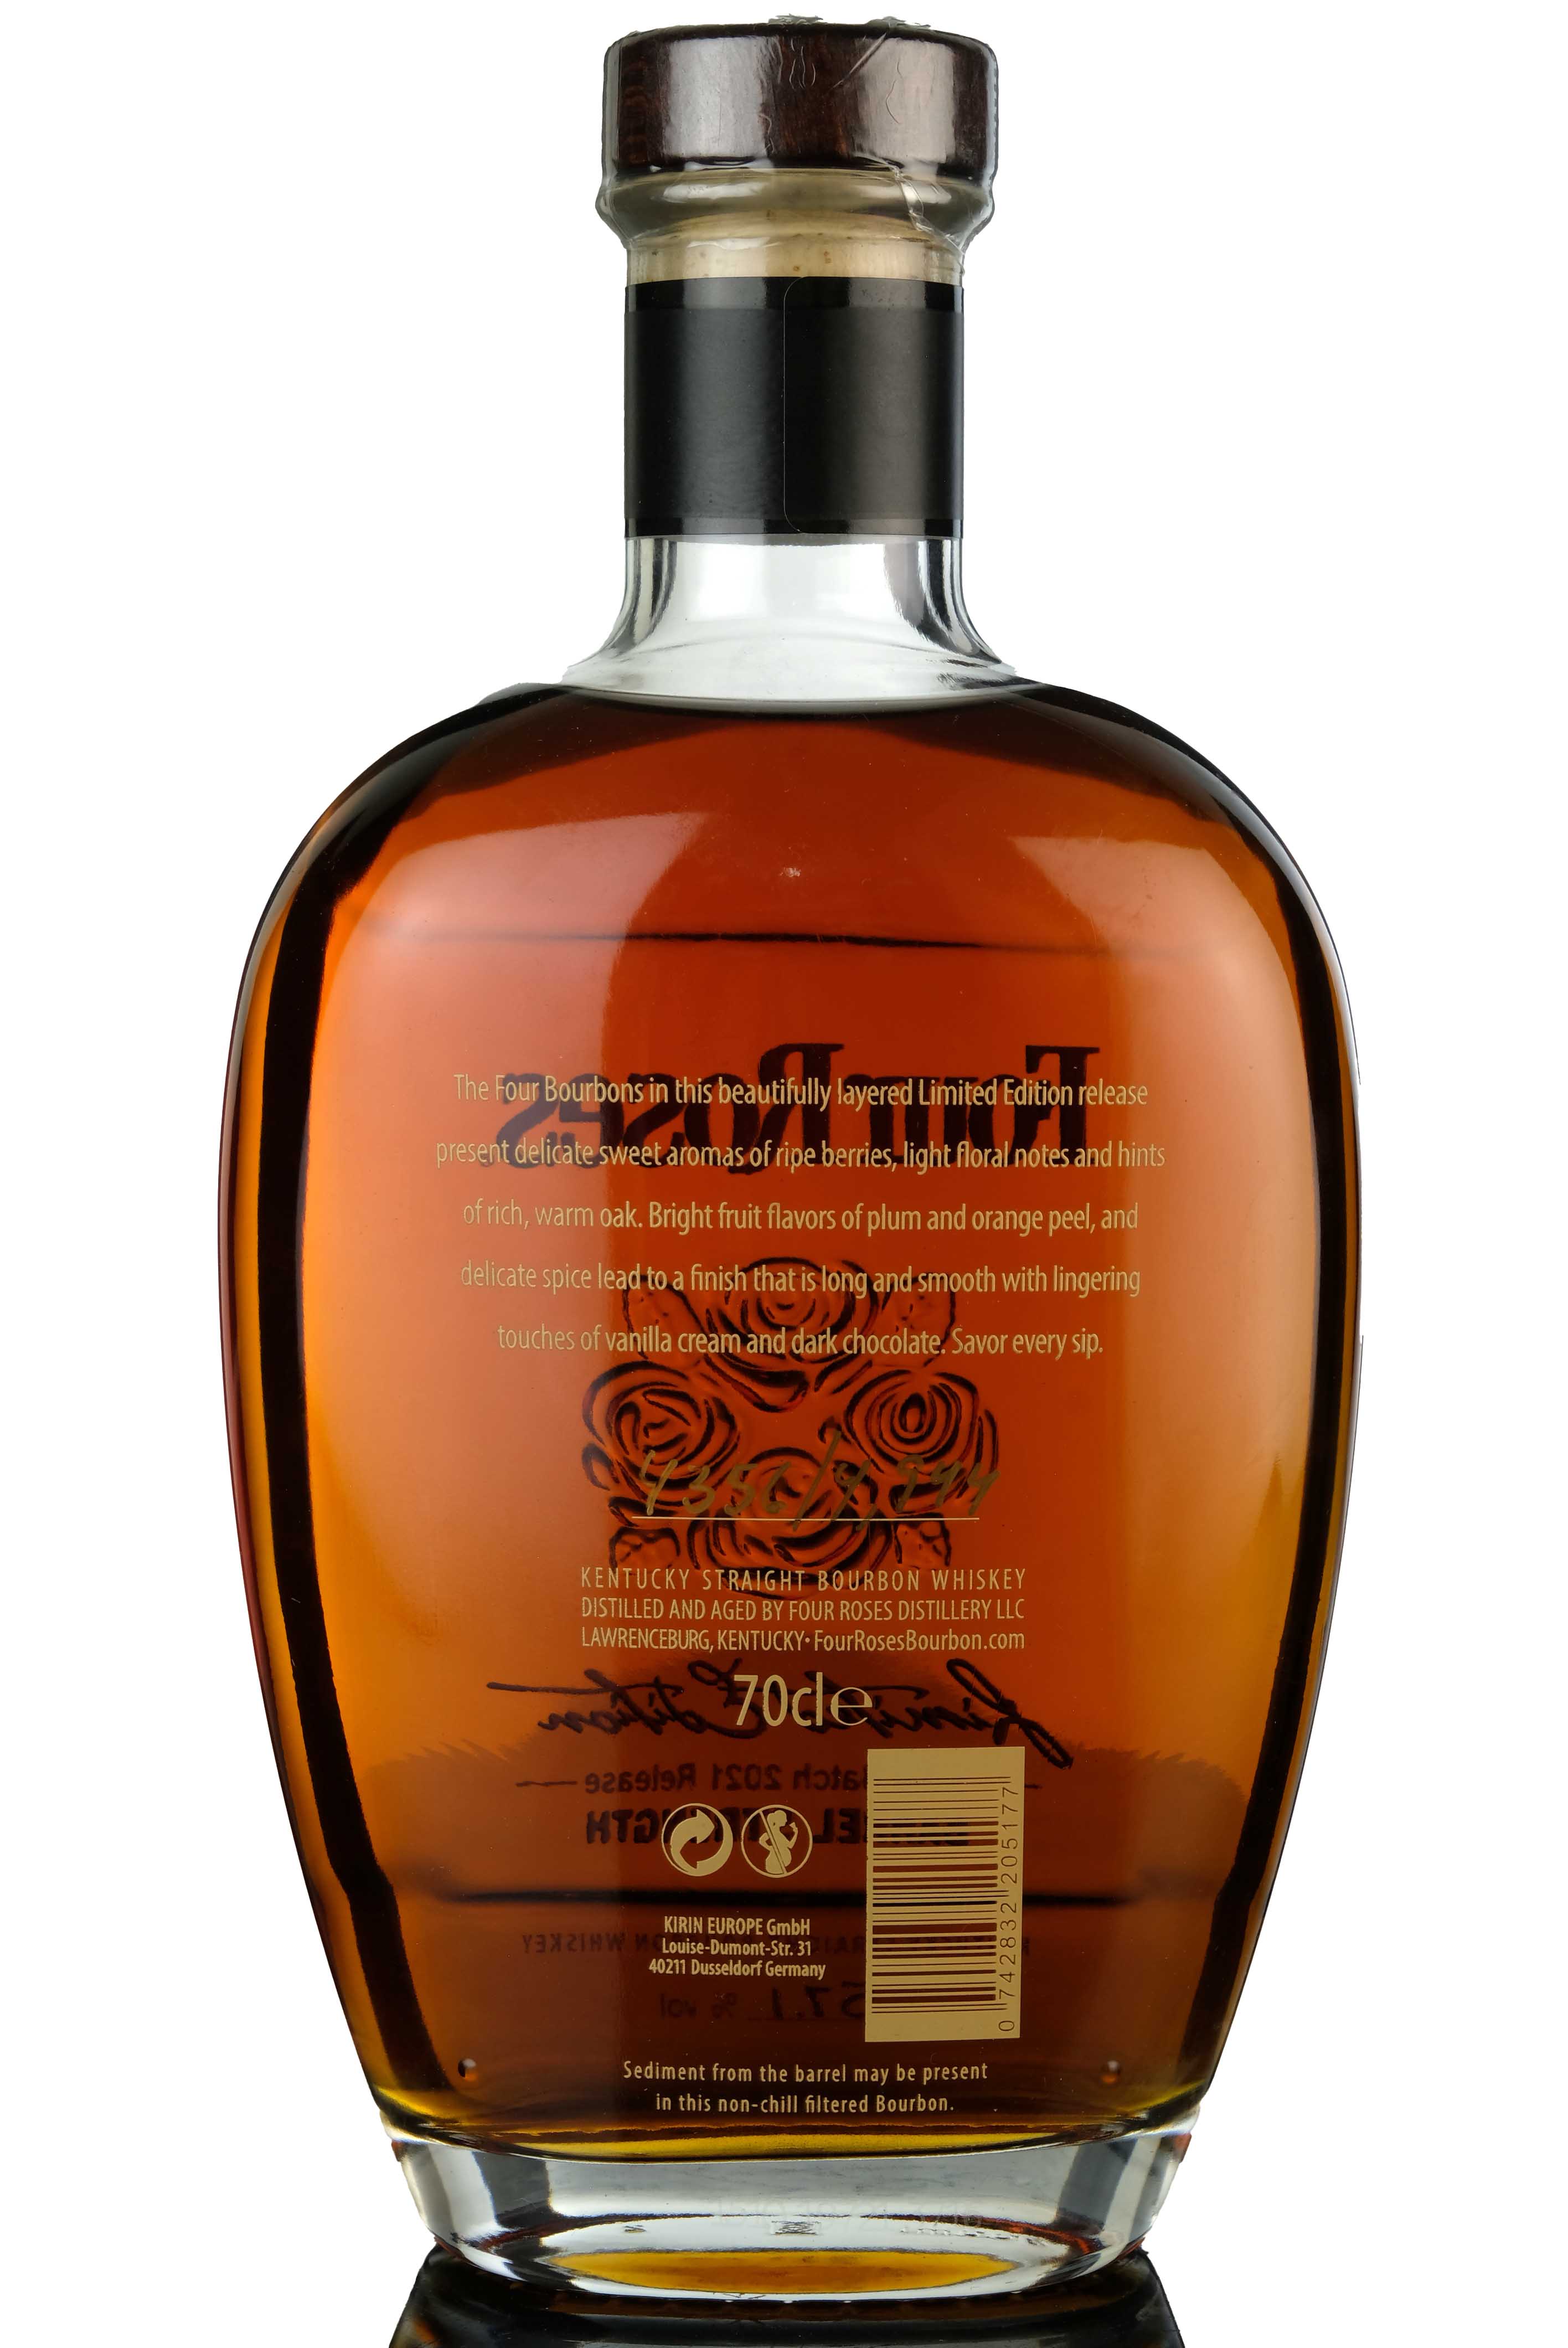 Four Roses Barrel Strength - Small Batch - 2021 Release